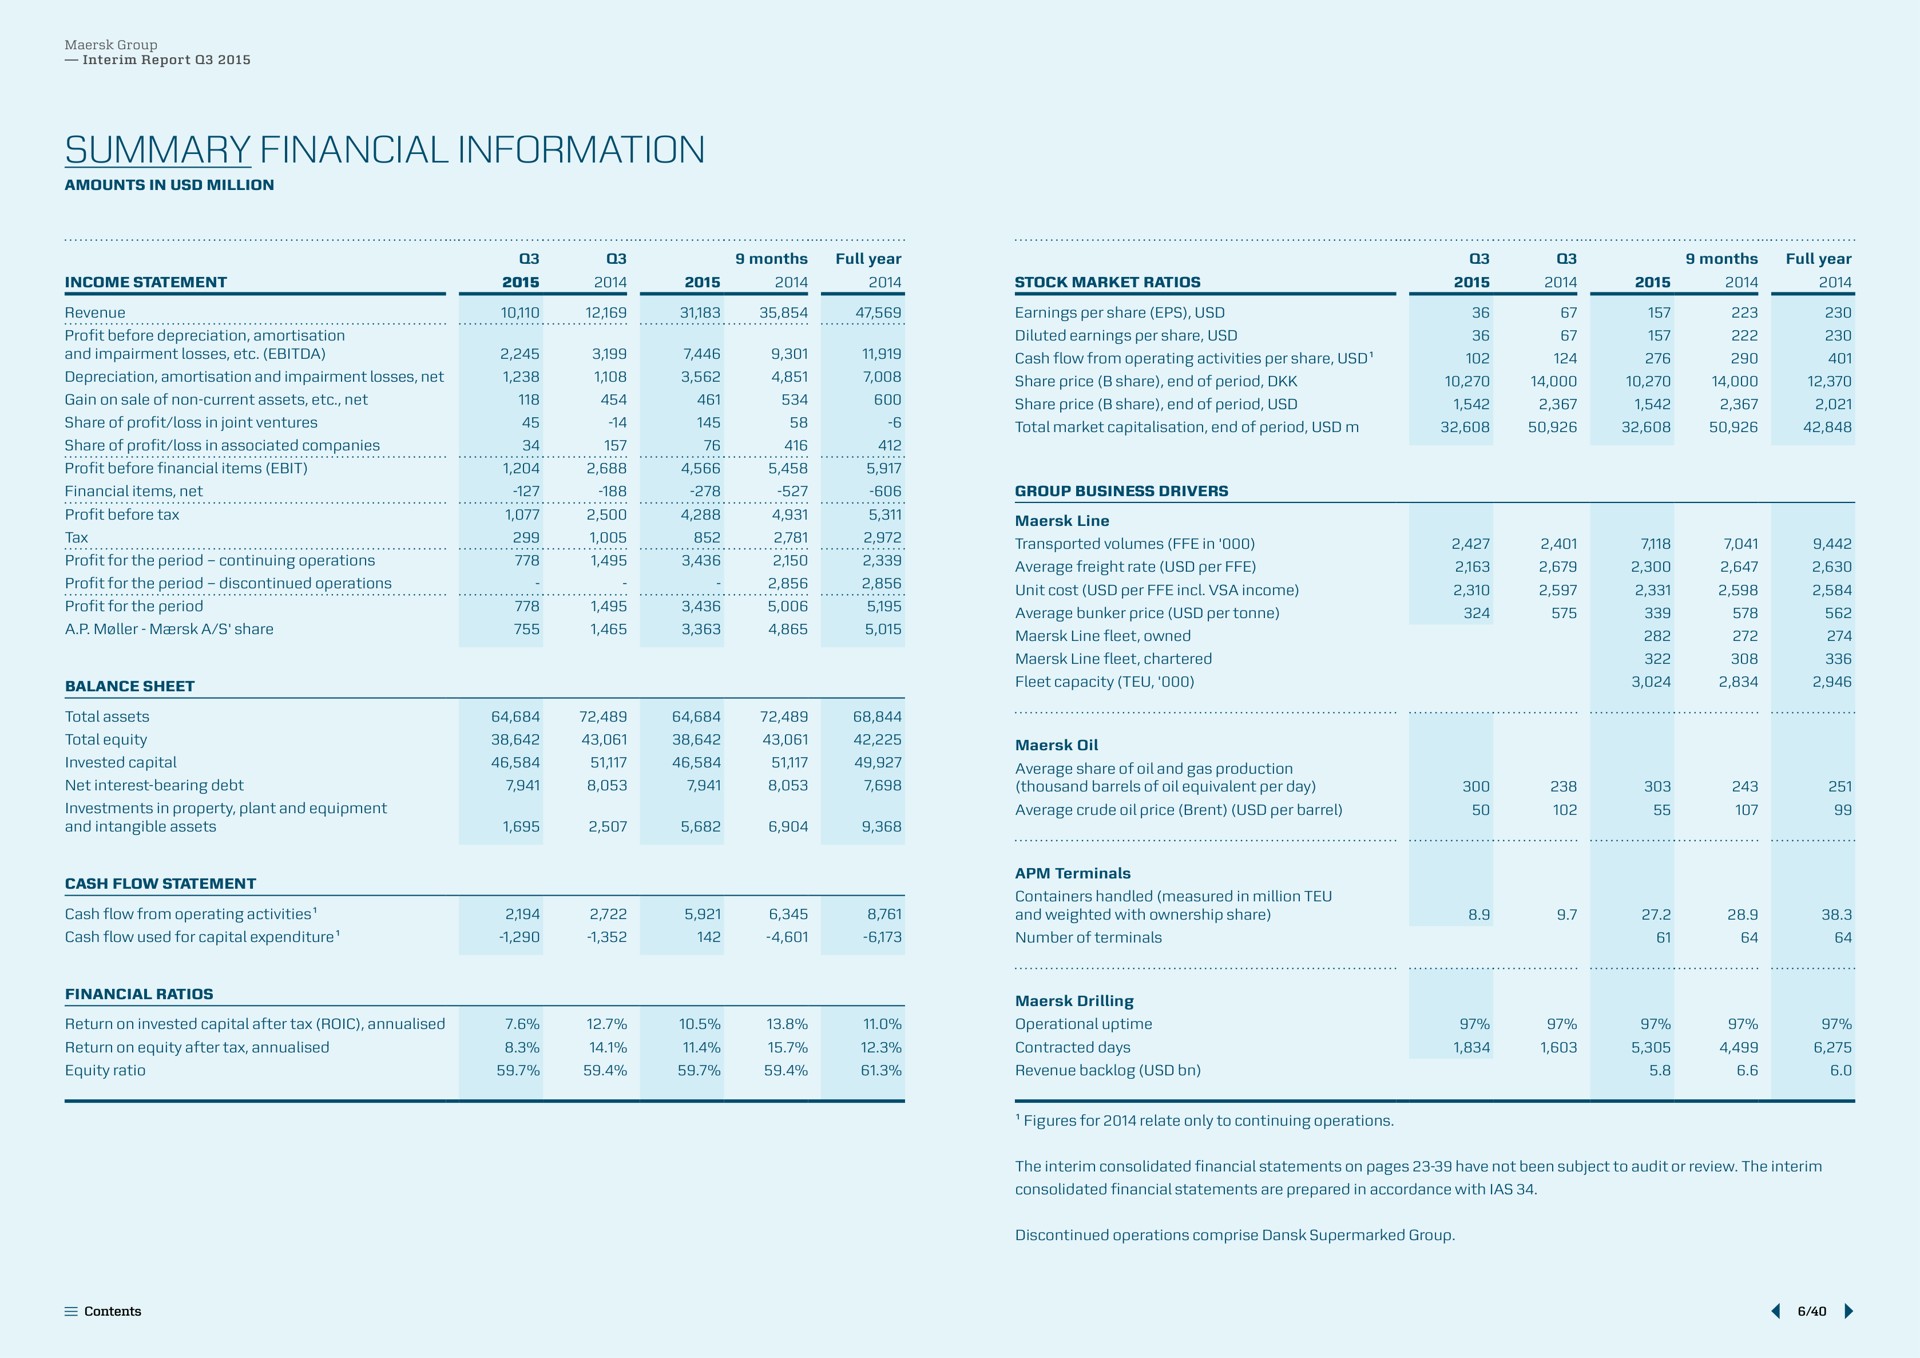 summary financial information ere are i career eer ree a see see a vane a | Maersk